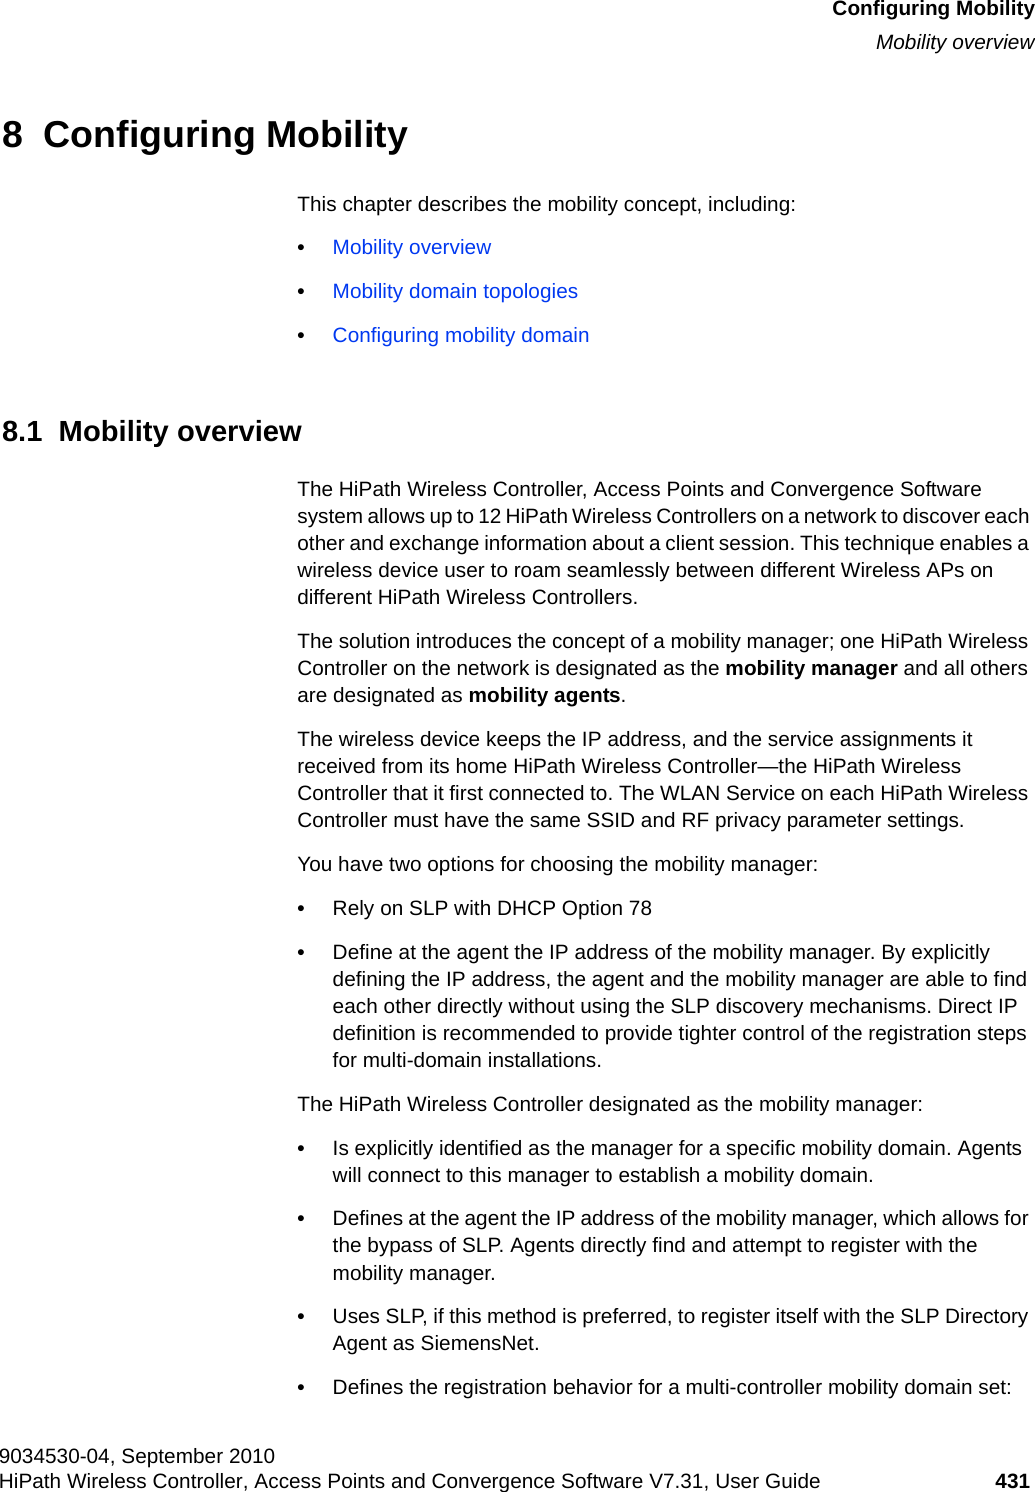 hwc_mobility.fmConfiguring MobilityMobility overview9034530-04, September 2010HiPath Wireless Controller, Access Points and Convergence Software V7.31, User Guide 431         8  Configuring MobilityThis chapter describes the mobility concept, including:•Mobility overview•Mobility domain topologies•Configuring mobility domain8.1  Mobility overviewThe HiPath Wireless Controller, Access Points and Convergence Software system allows up to 12 HiPath Wireless Controllers on a network to discover each other and exchange information about a client session. This technique enables a wireless device user to roam seamlessly between different Wireless APs on different HiPath Wireless Controllers. The solution introduces the concept of a mobility manager; one HiPath Wireless Controller on the network is designated as the mobility manager and all others are designated as mobility agents.The wireless device keeps the IP address, and the service assignments it received from its home HiPath Wireless Controller—the HiPath Wireless Controller that it first connected to. The WLAN Service on each HiPath Wireless Controller must have the same SSID and RF privacy parameter settings.You have two options for choosing the mobility manager:•Rely on SLP with DHCP Option 78•Define at the agent the IP address of the mobility manager. By explicitly defining the IP address, the agent and the mobility manager are able to find each other directly without using the SLP discovery mechanisms. Direct IP definition is recommended to provide tighter control of the registration steps for multi-domain installations.The HiPath Wireless Controller designated as the mobility manager:•Is explicitly identified as the manager for a specific mobility domain. Agents will connect to this manager to establish a mobility domain.•Defines at the agent the IP address of the mobility manager, which allows for the bypass of SLP. Agents directly find and attempt to register with the mobility manager.•Uses SLP, if this method is preferred, to register itself with the SLP Directory Agent as SiemensNet.•Defines the registration behavior for a multi-controller mobility domain set: